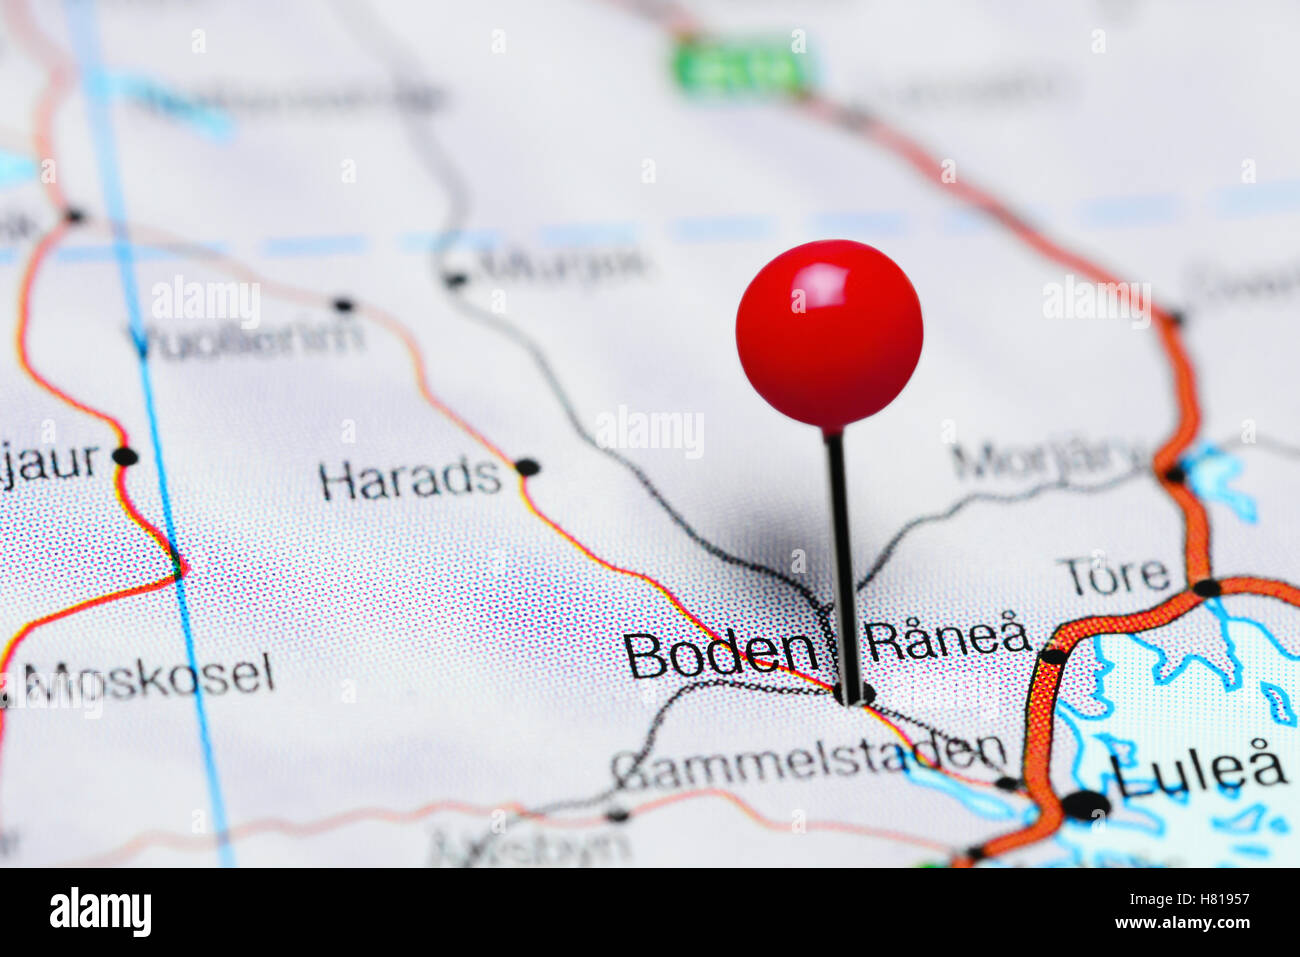 Boden pinned on a map of Sweden Stock Photo